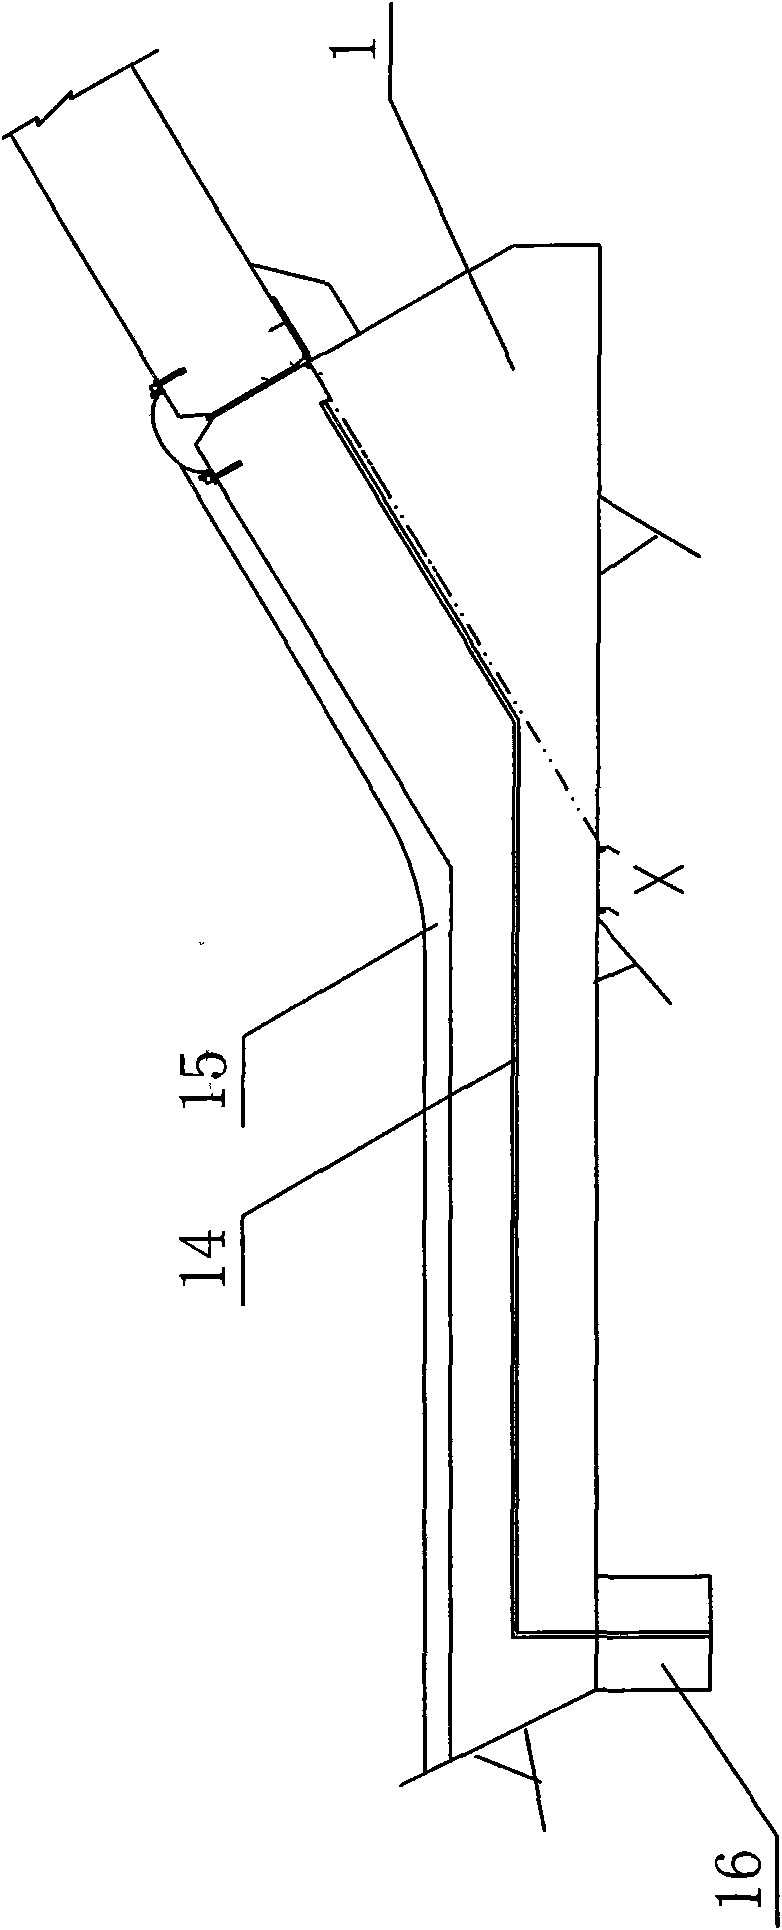 Face rockfill dam toe board structure constructed on completely weathered bed rock and construction method thereof